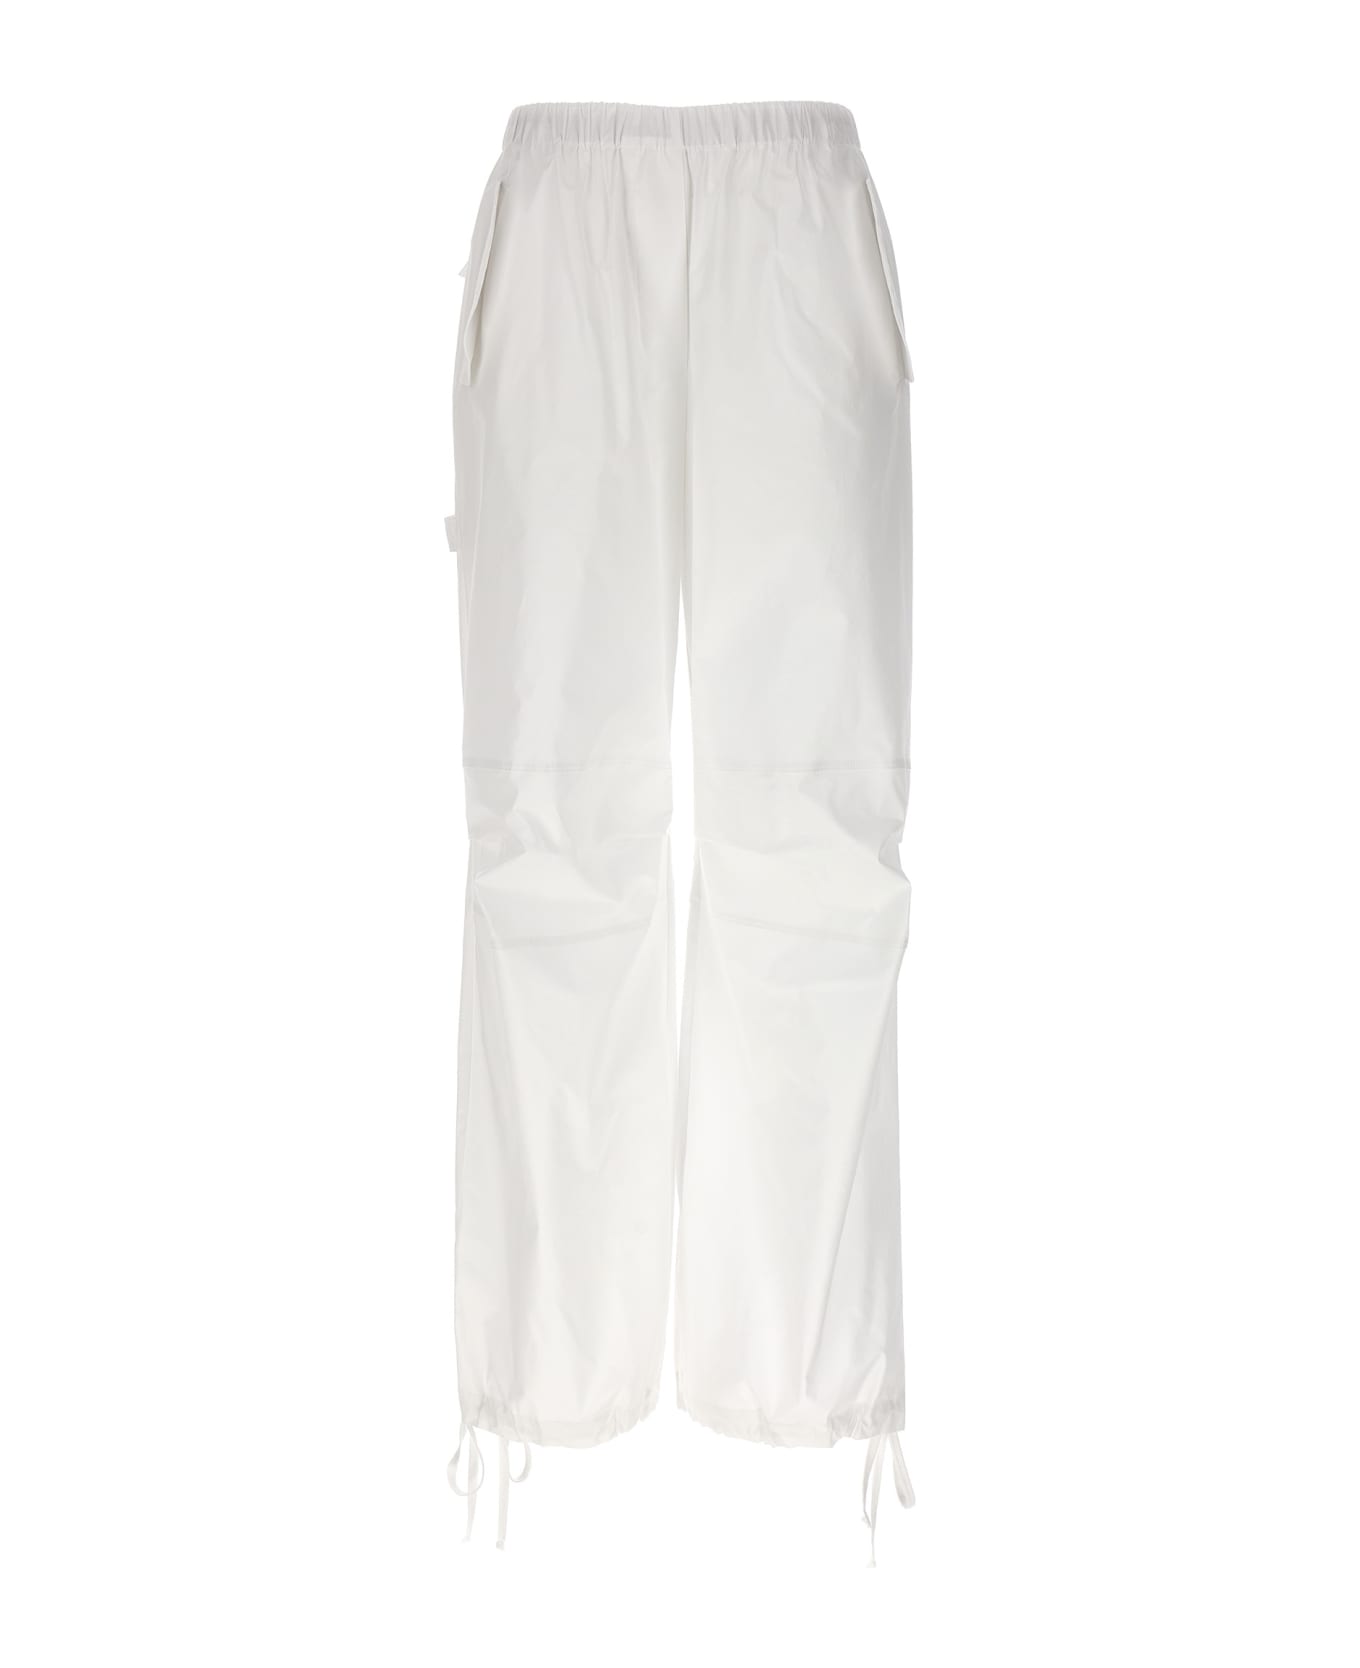 (nude) Cargo Trousers - White ボトムス